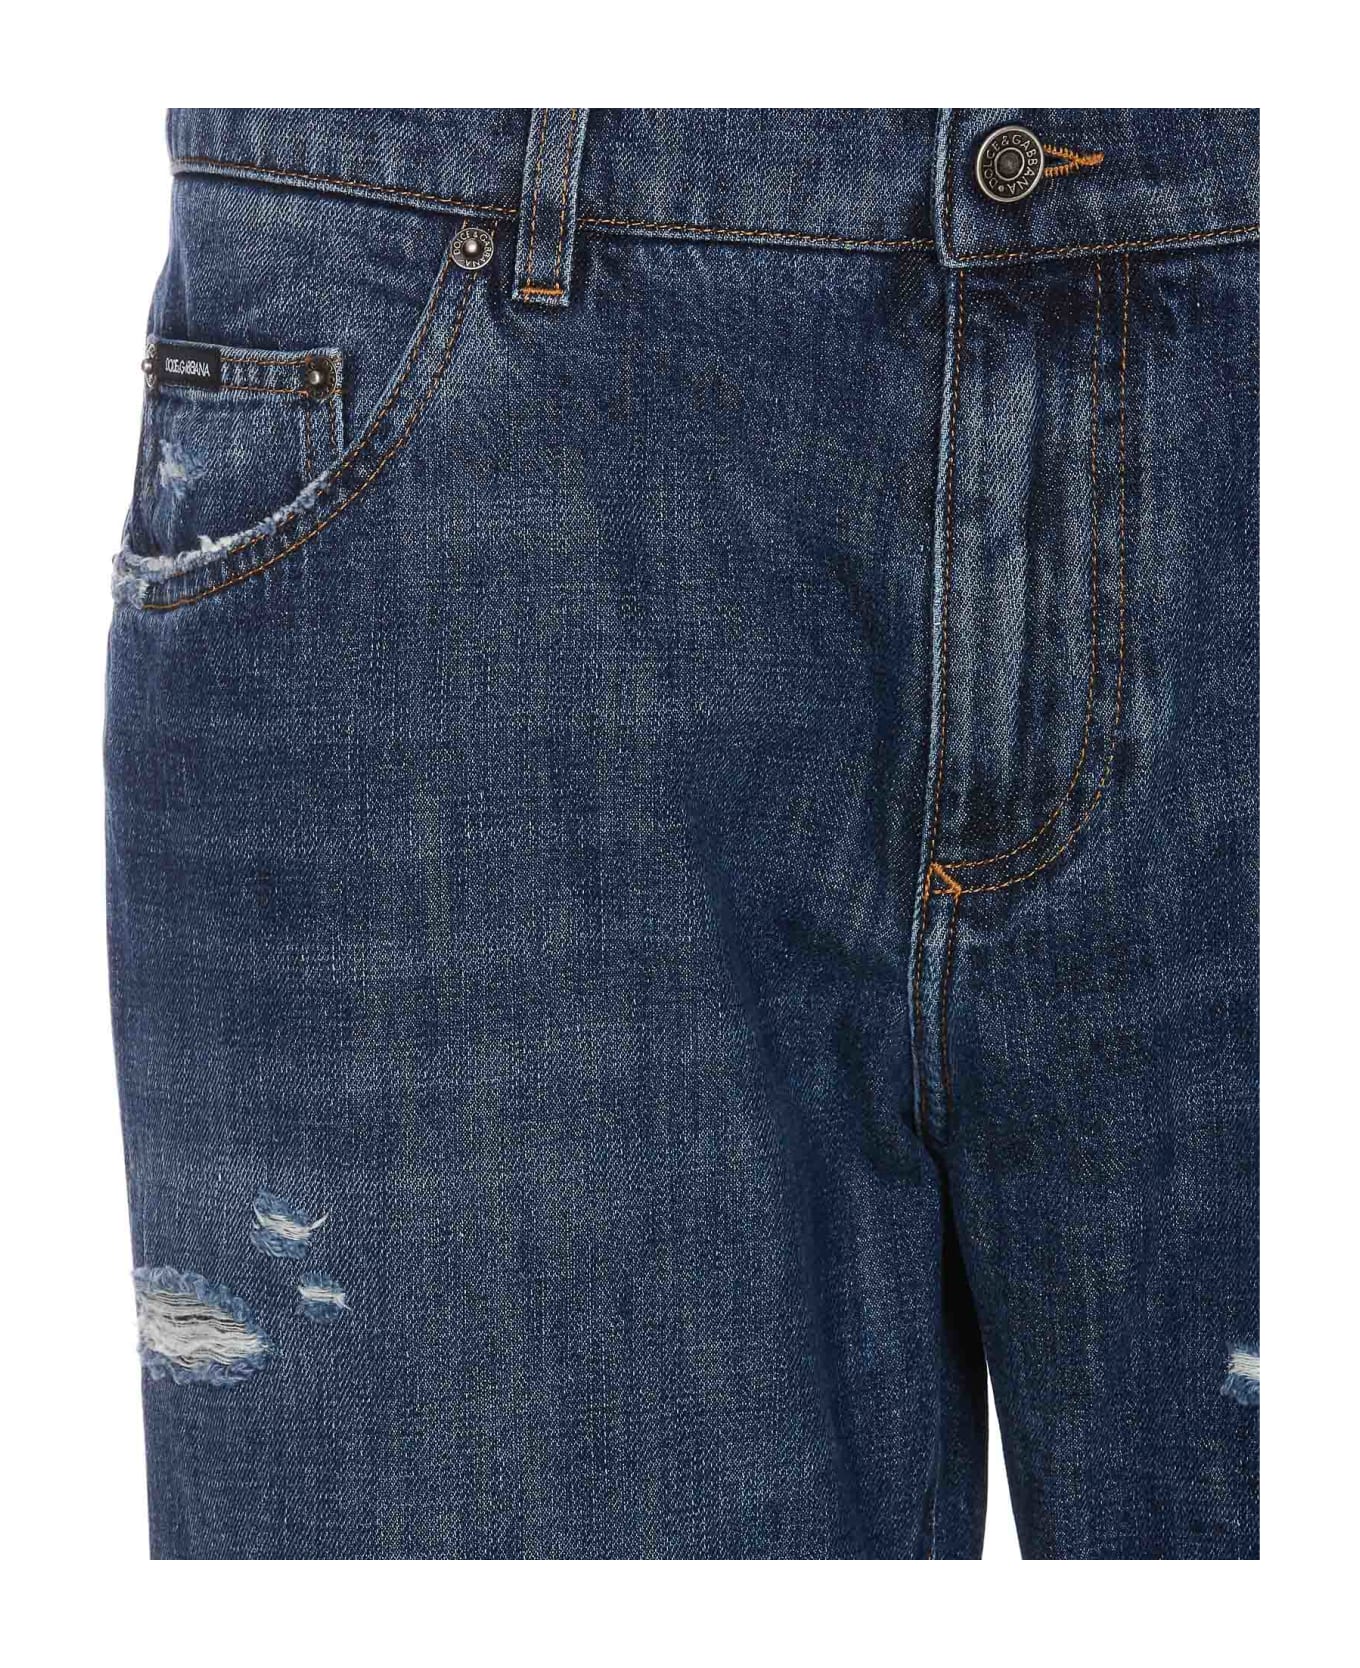 Dolce & Gabbana Jeans With Scraping - Blue デニム